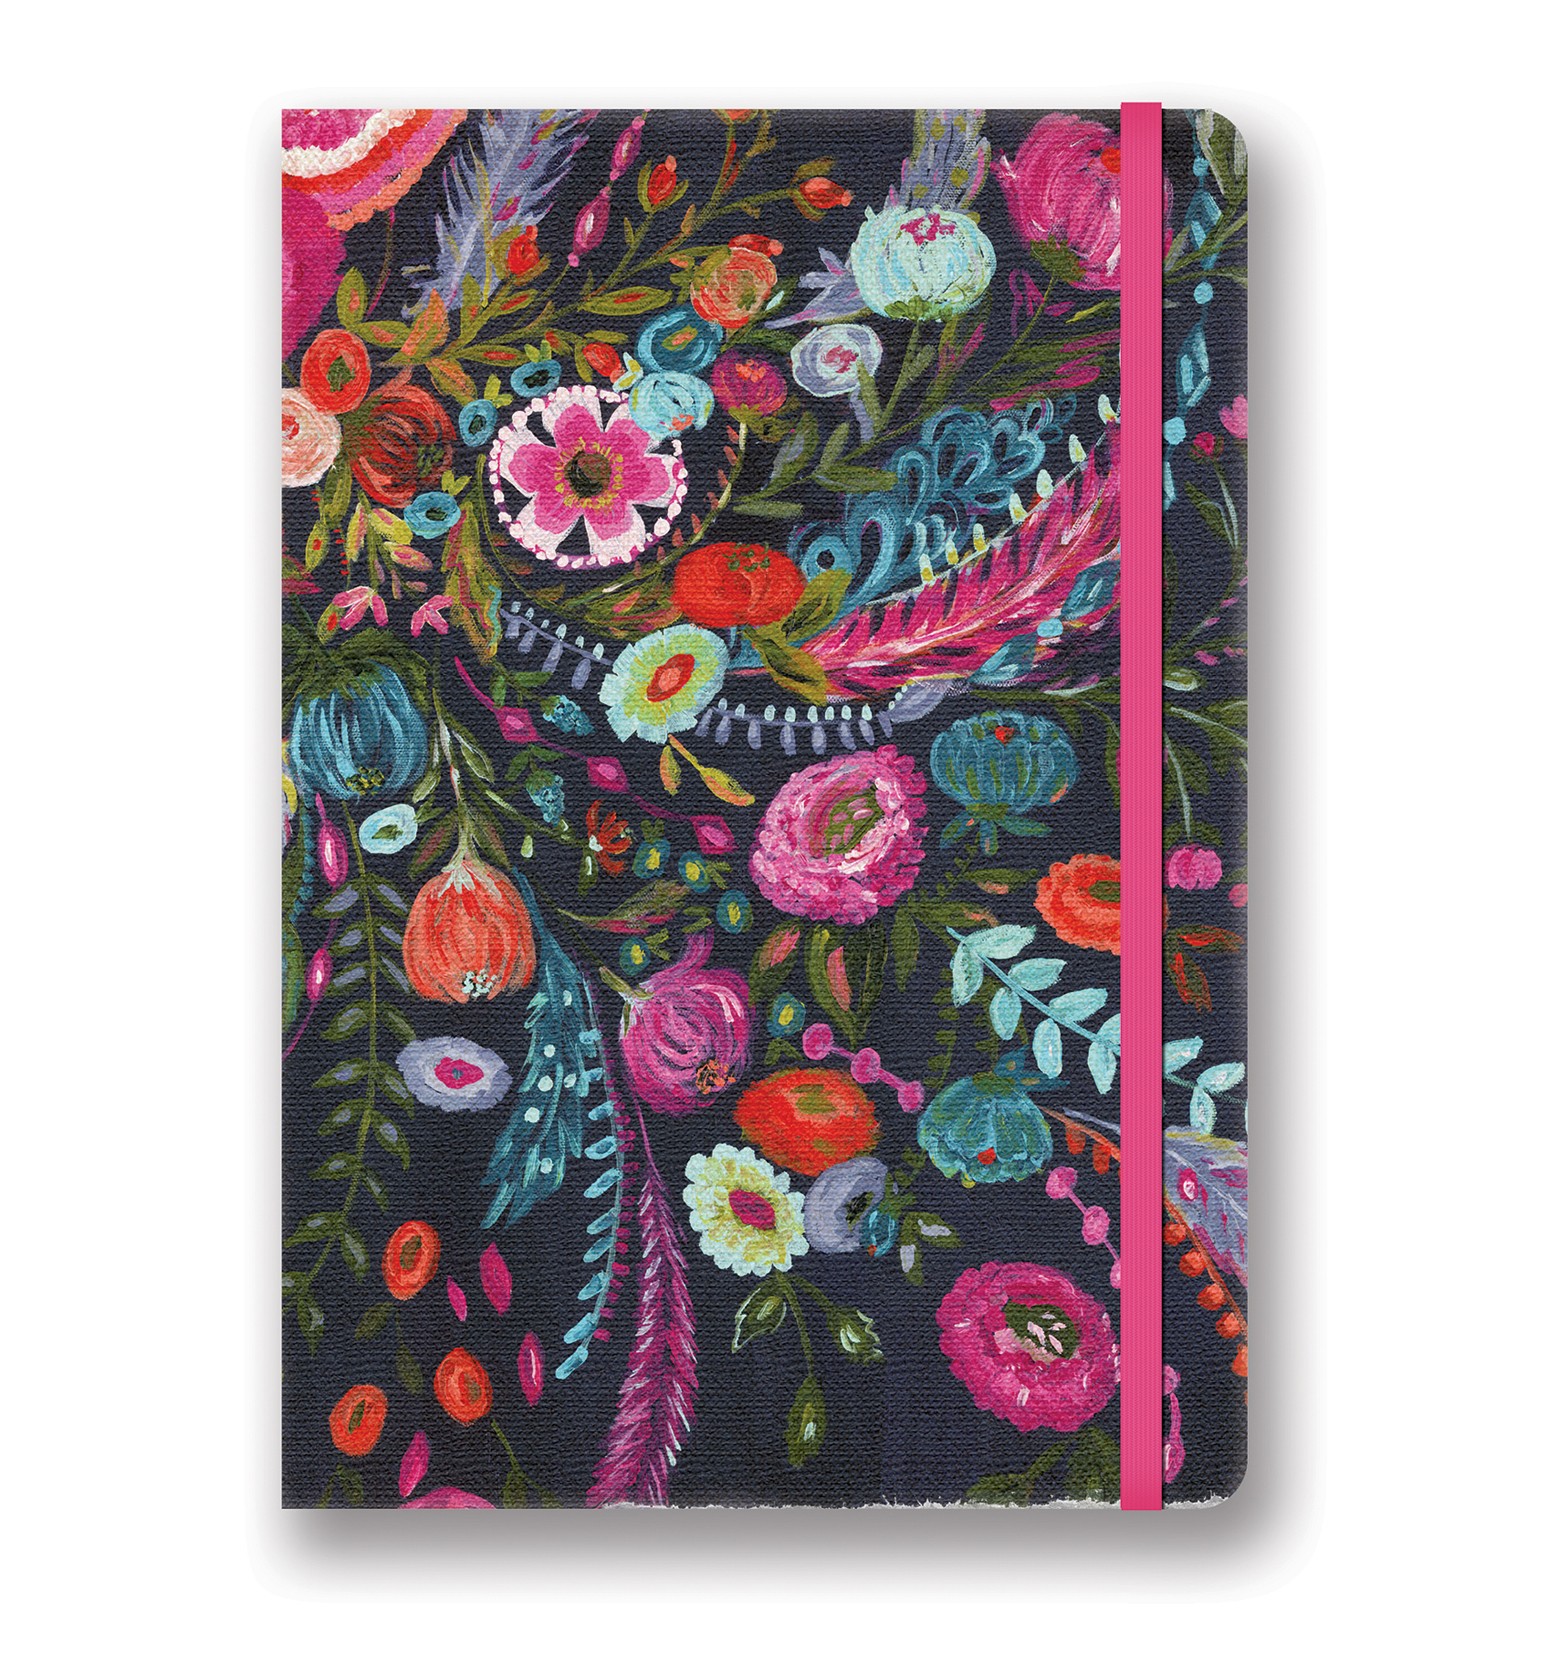 Gypsy Floral Compact Deconstructed Journal 
															/ Studio Oh!							